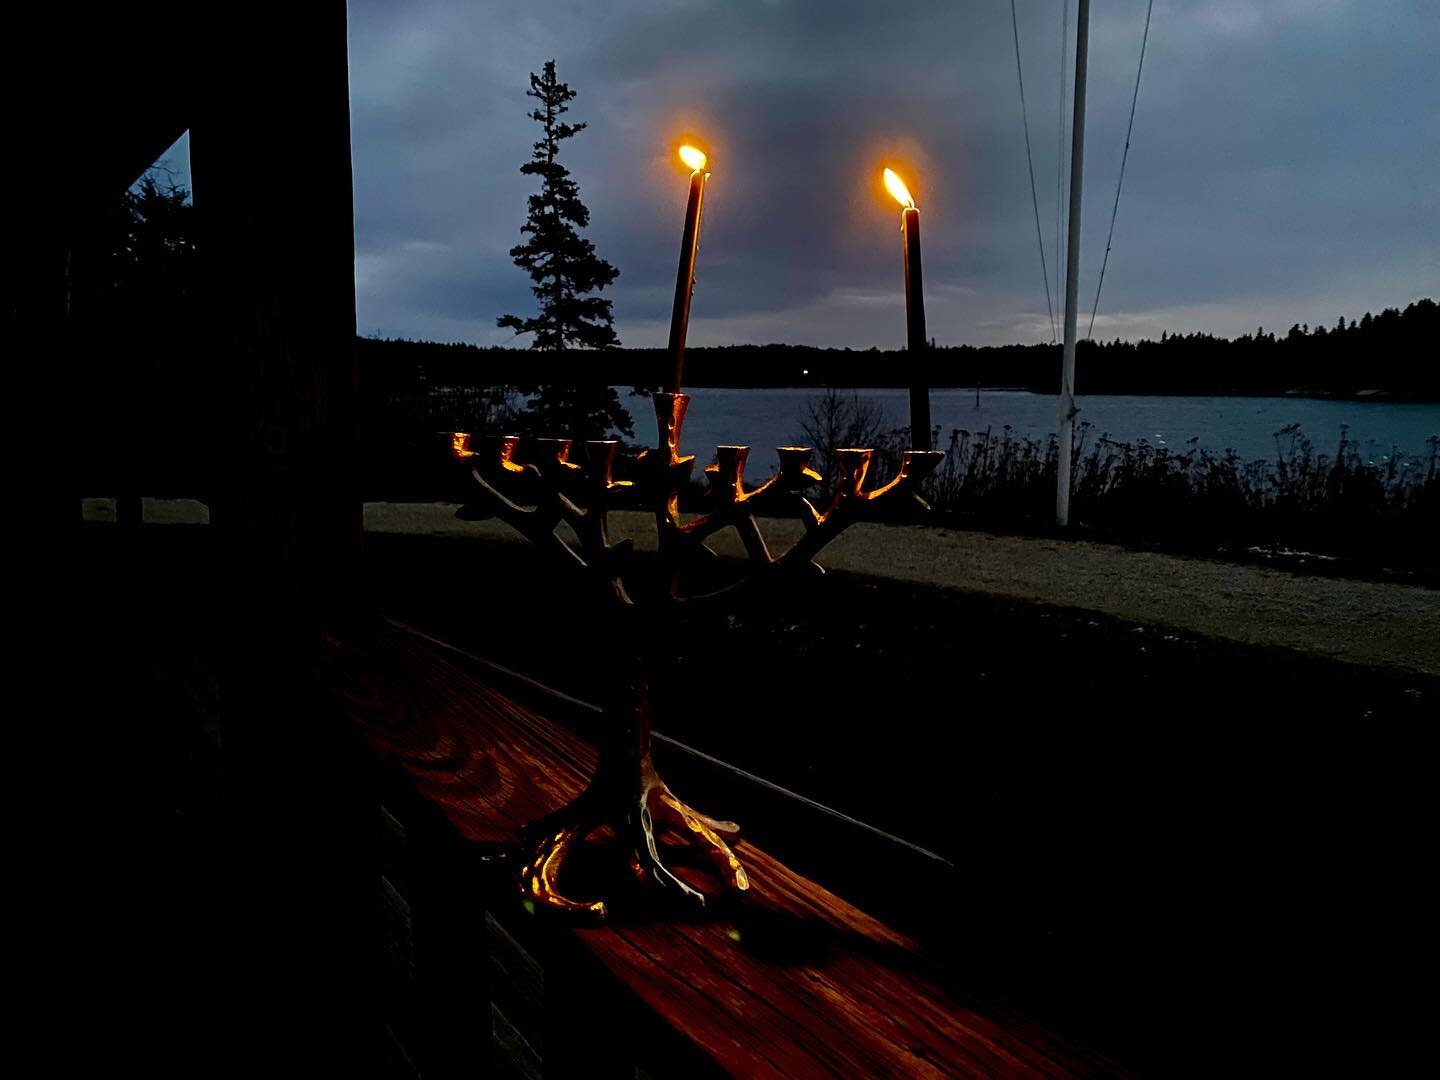 The grills are cold, but the menorah is blazing. Happy Hanukkah from the CHYC porch!